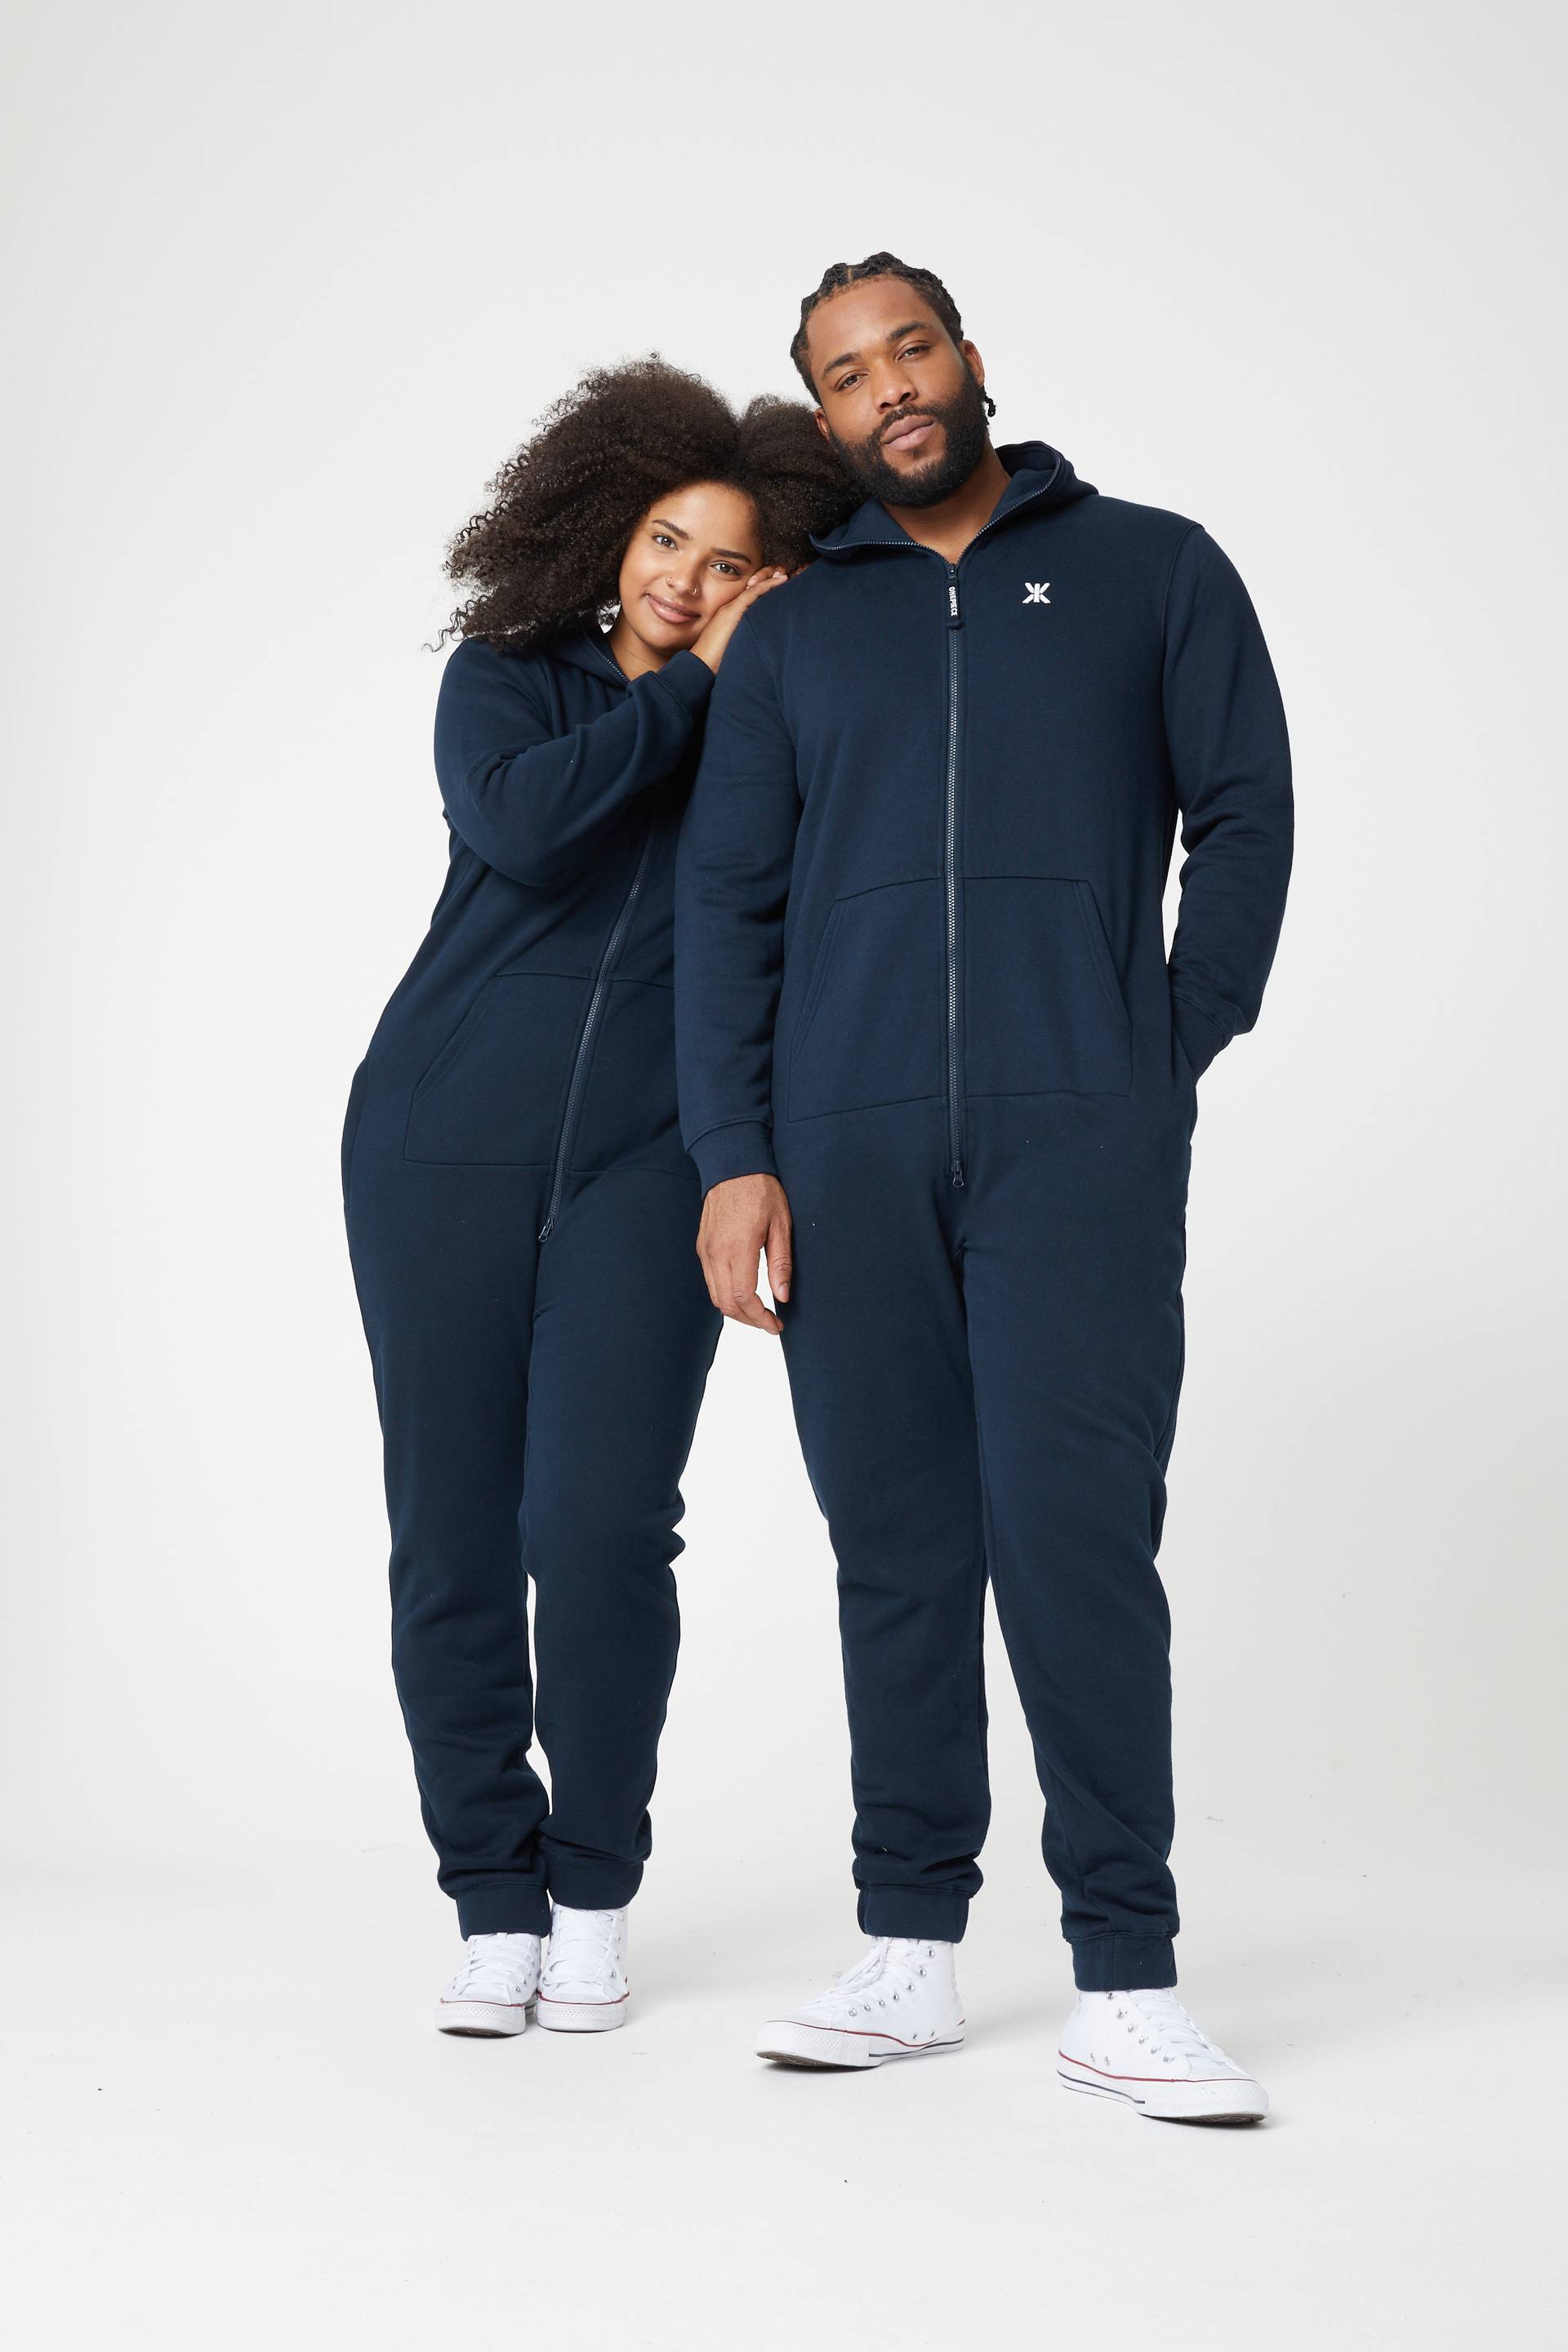 Onesies for women Jumpsuit with Hood One Piece Set Outfit